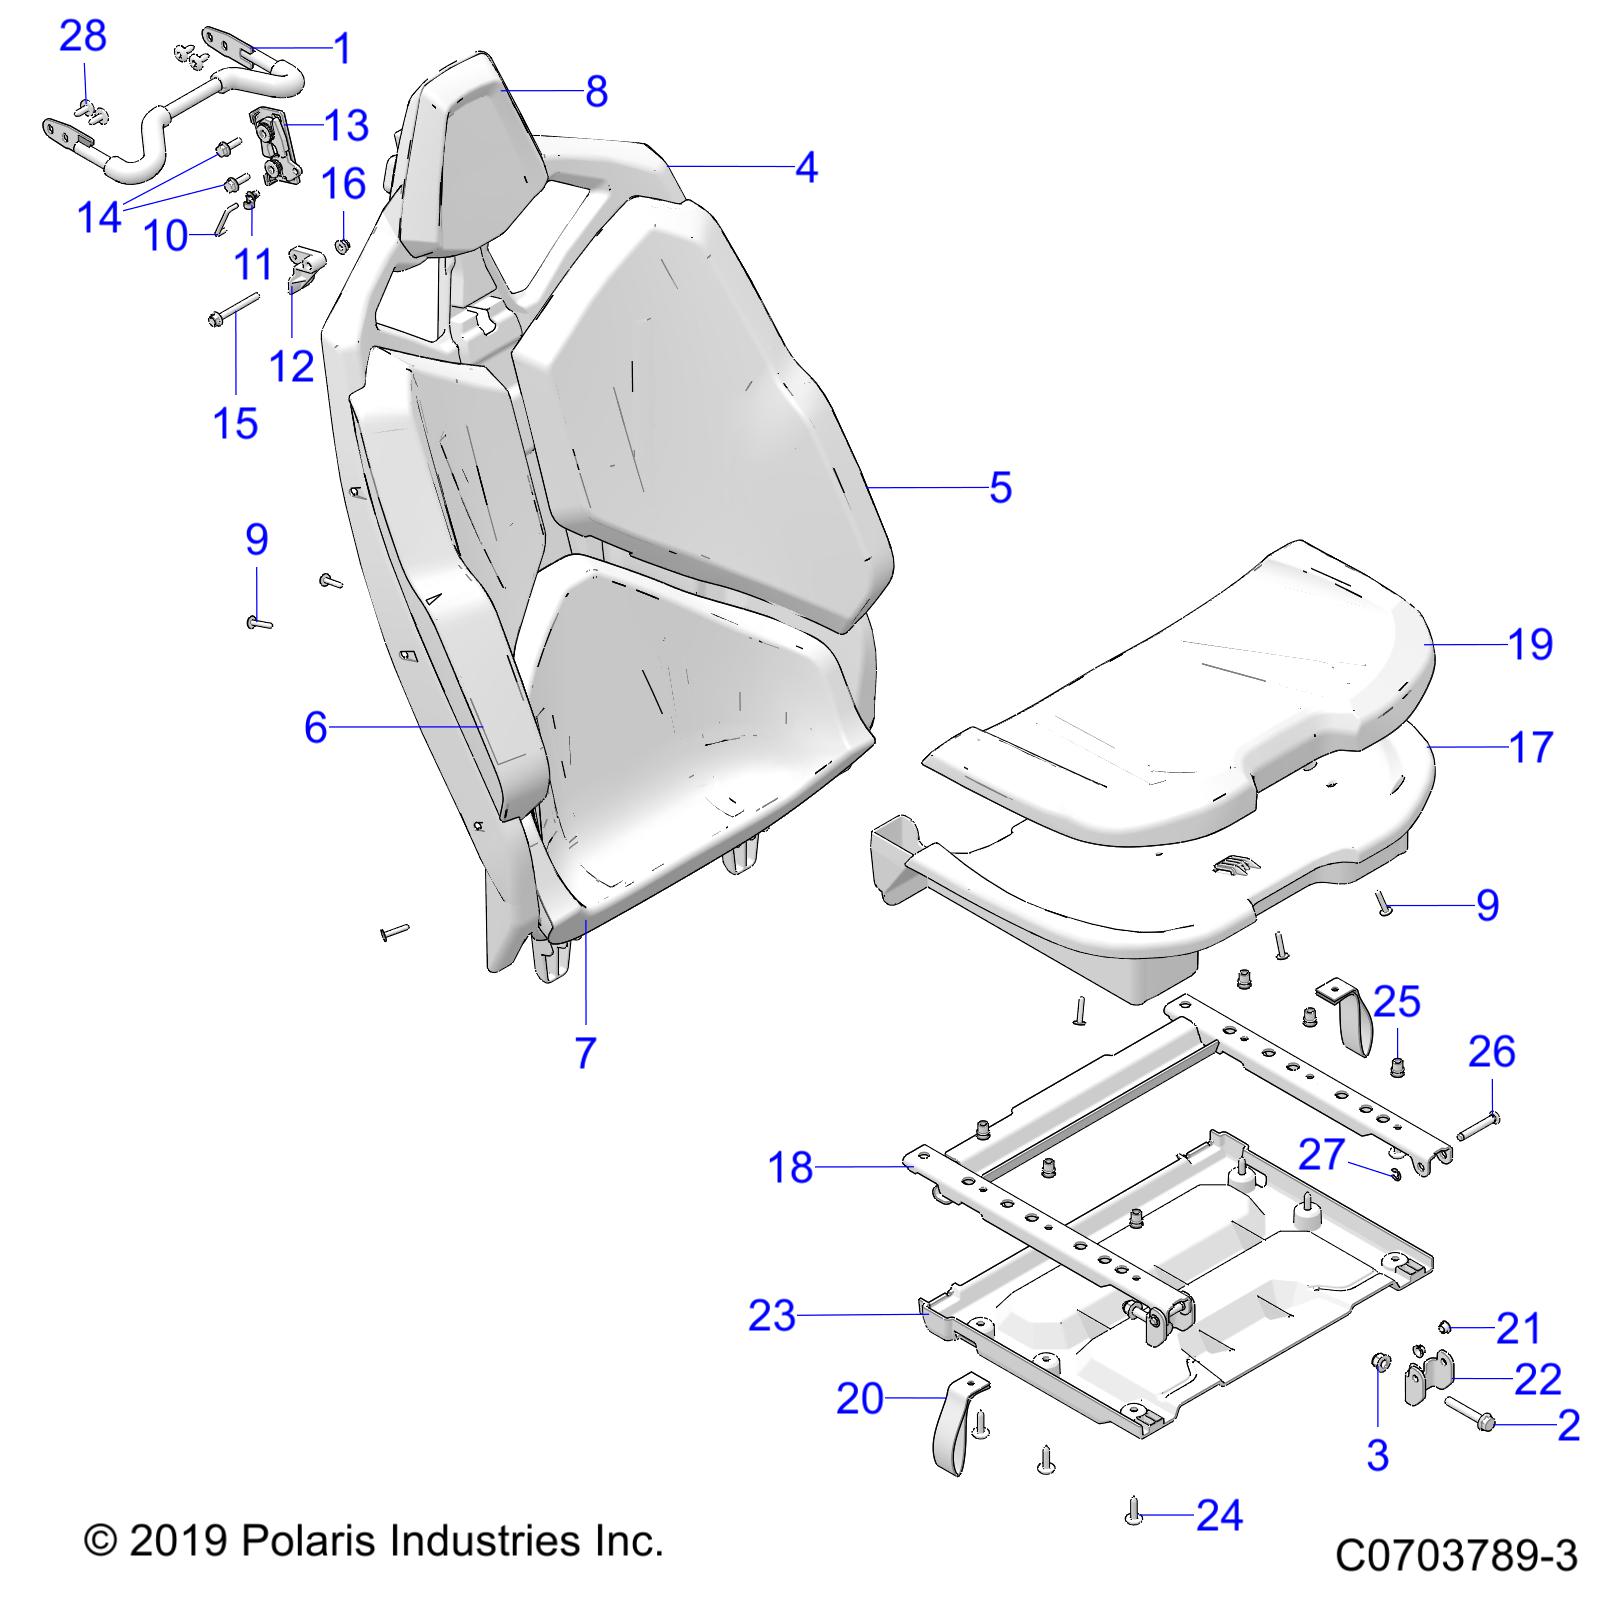 Part Number : 2691801 ASM-SEAT BACK BLK/LL/IR RED ST